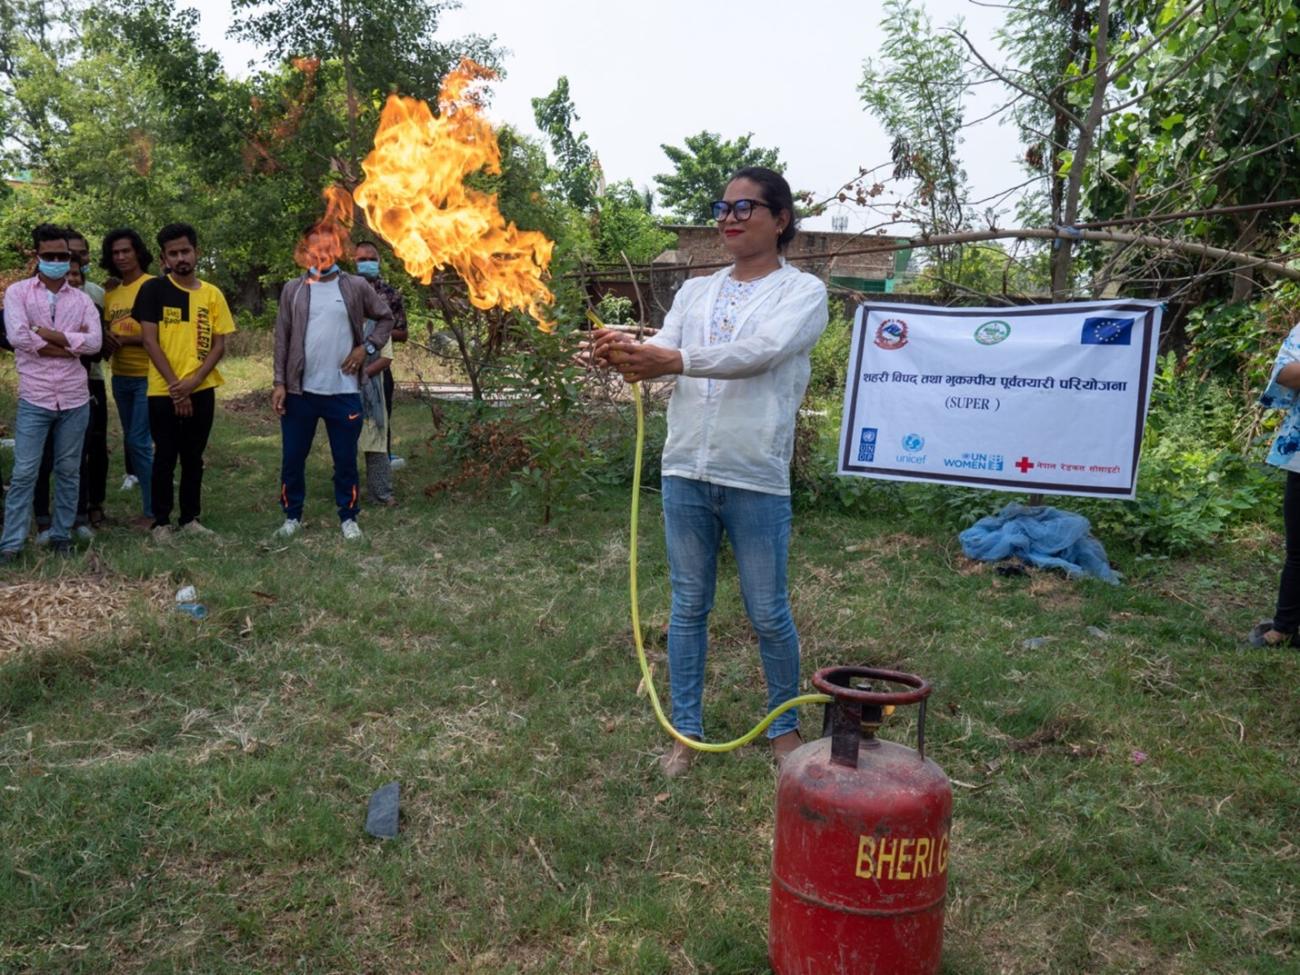 A participant attempts to put out the fire on a gas cylinder, as learned in a Dhangadhi Sub-Metropolitan City organized firefighting training.